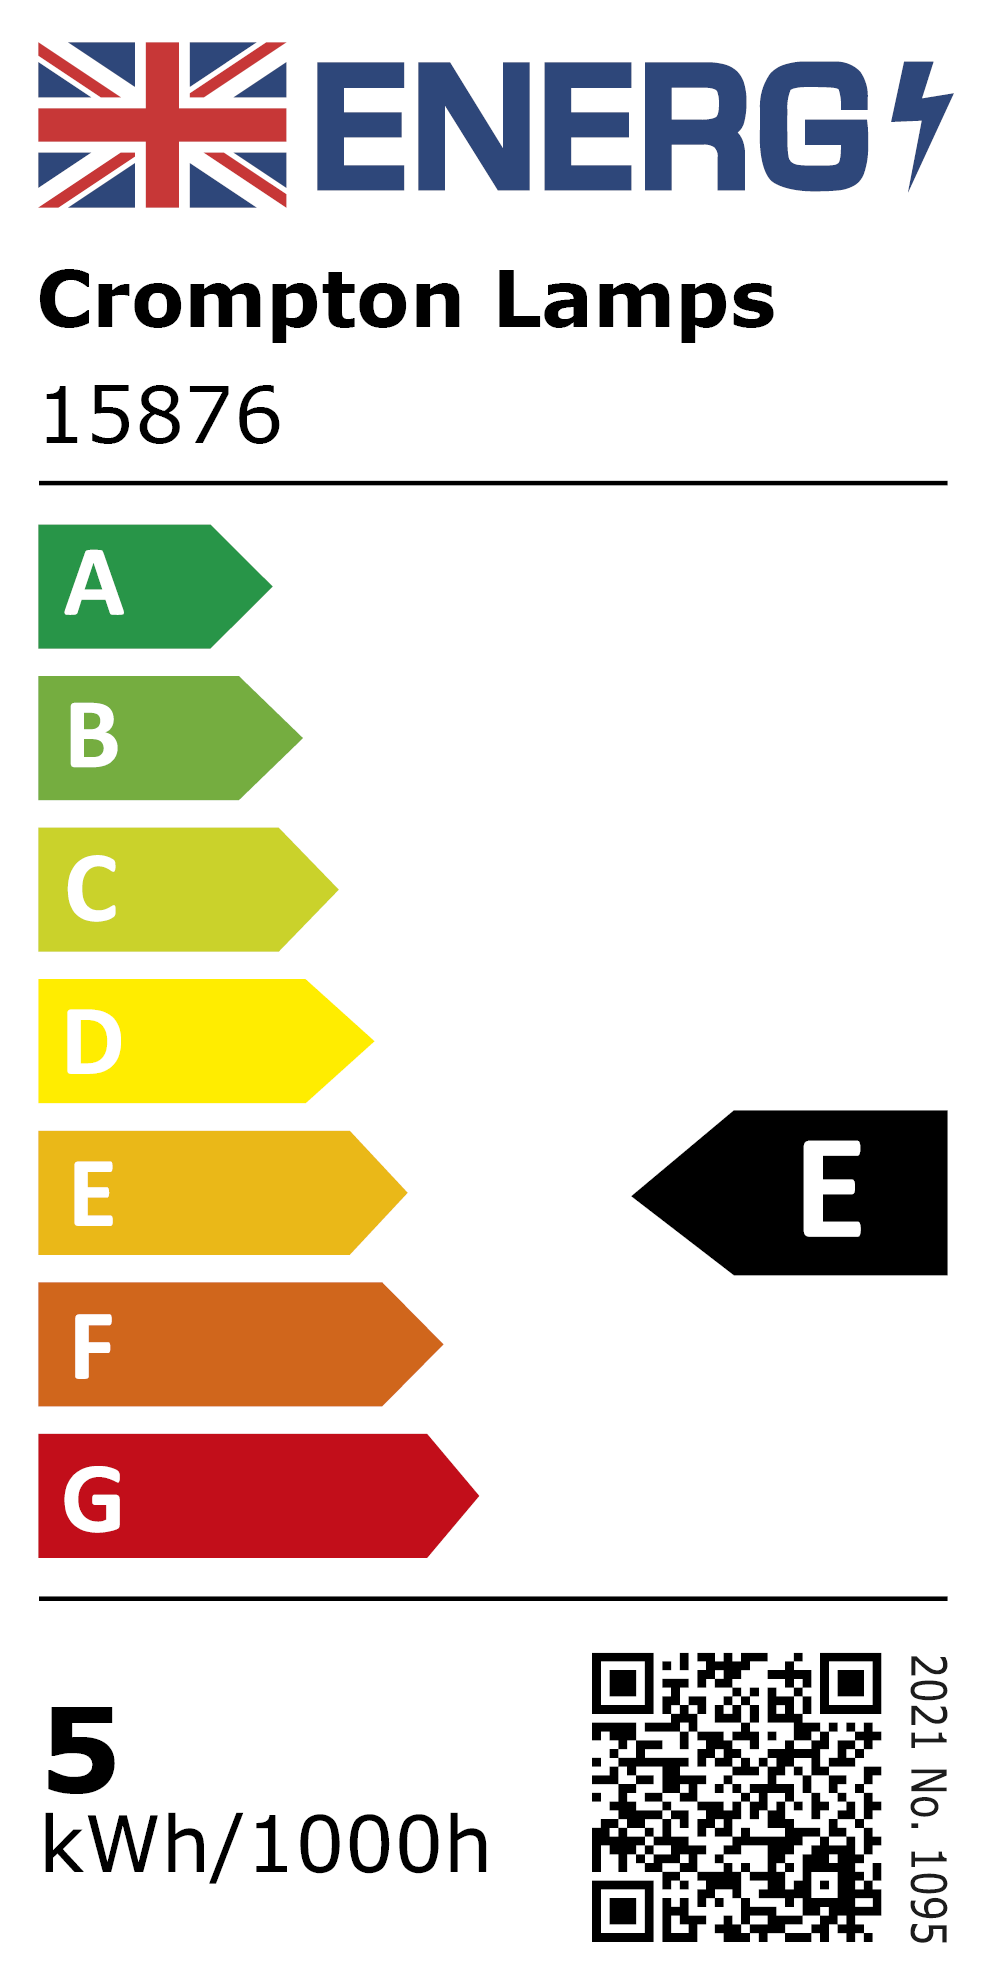 New 2021 Energy Rating Label: MPN 15876